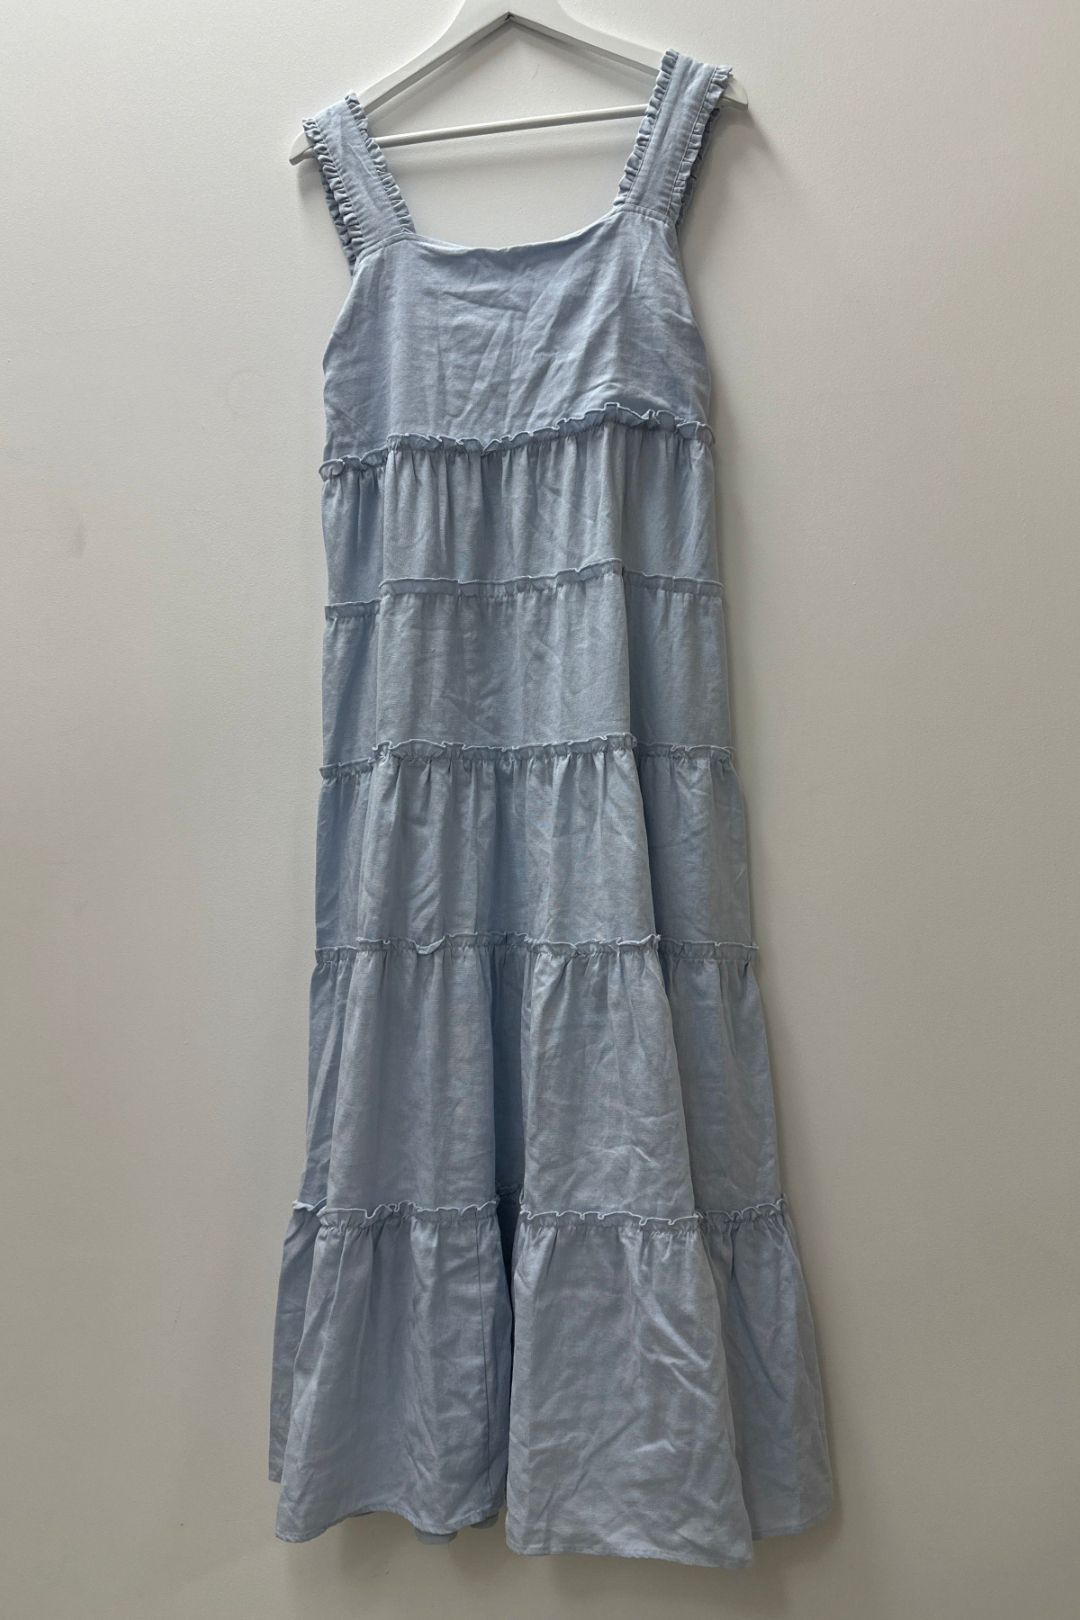 Girl and the Sun Emery Maxi Dress in Blue